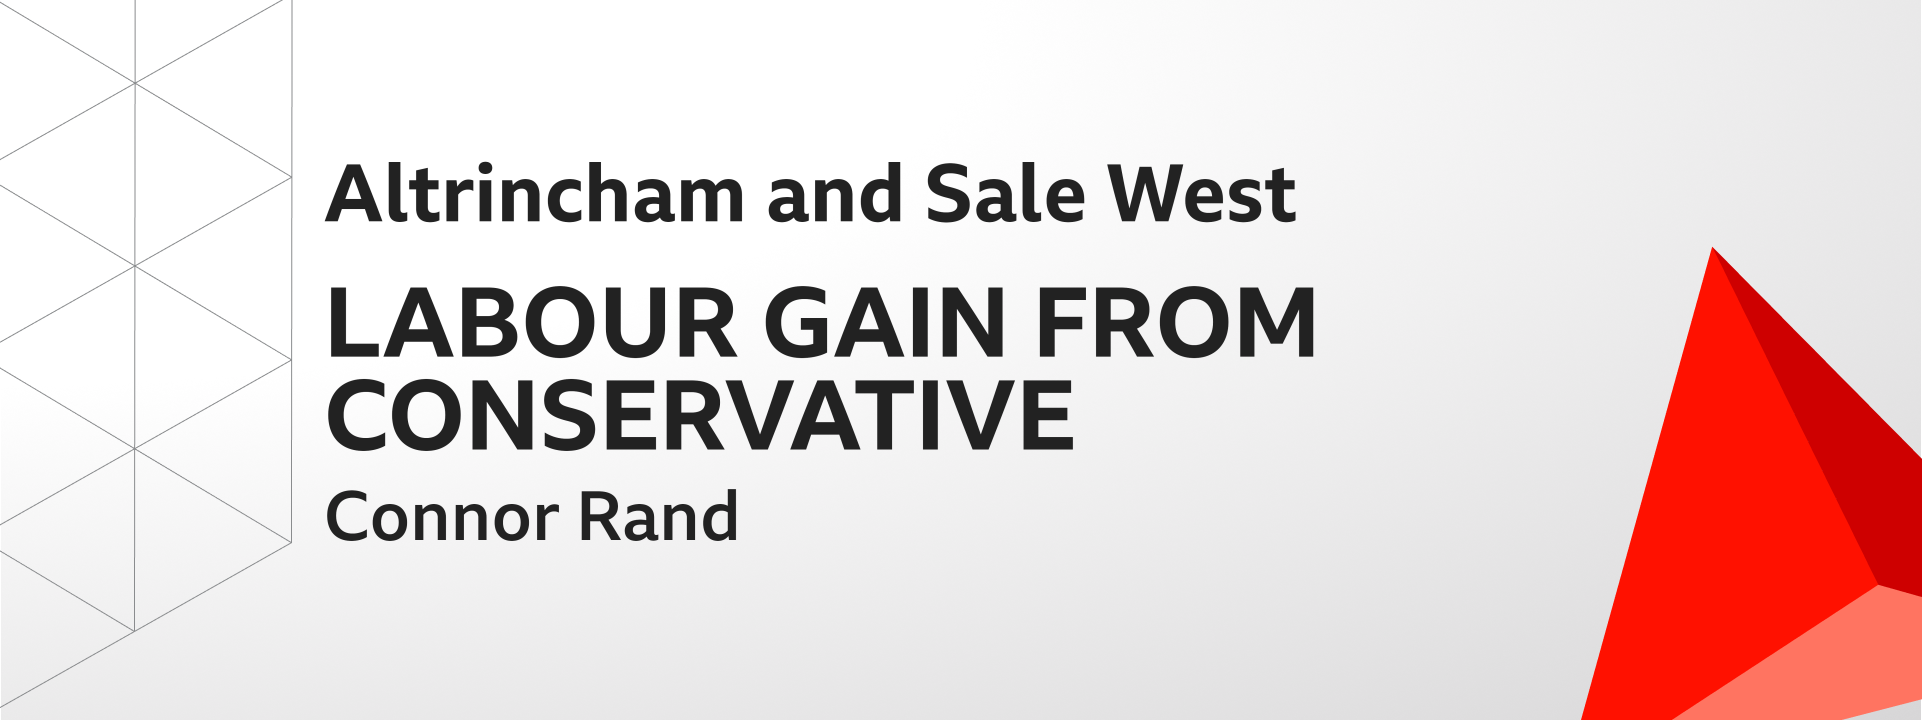 Graphic showing Labour gains Altrincham and Sale West from the Conservatives. The winning candidate was Connor Rand.